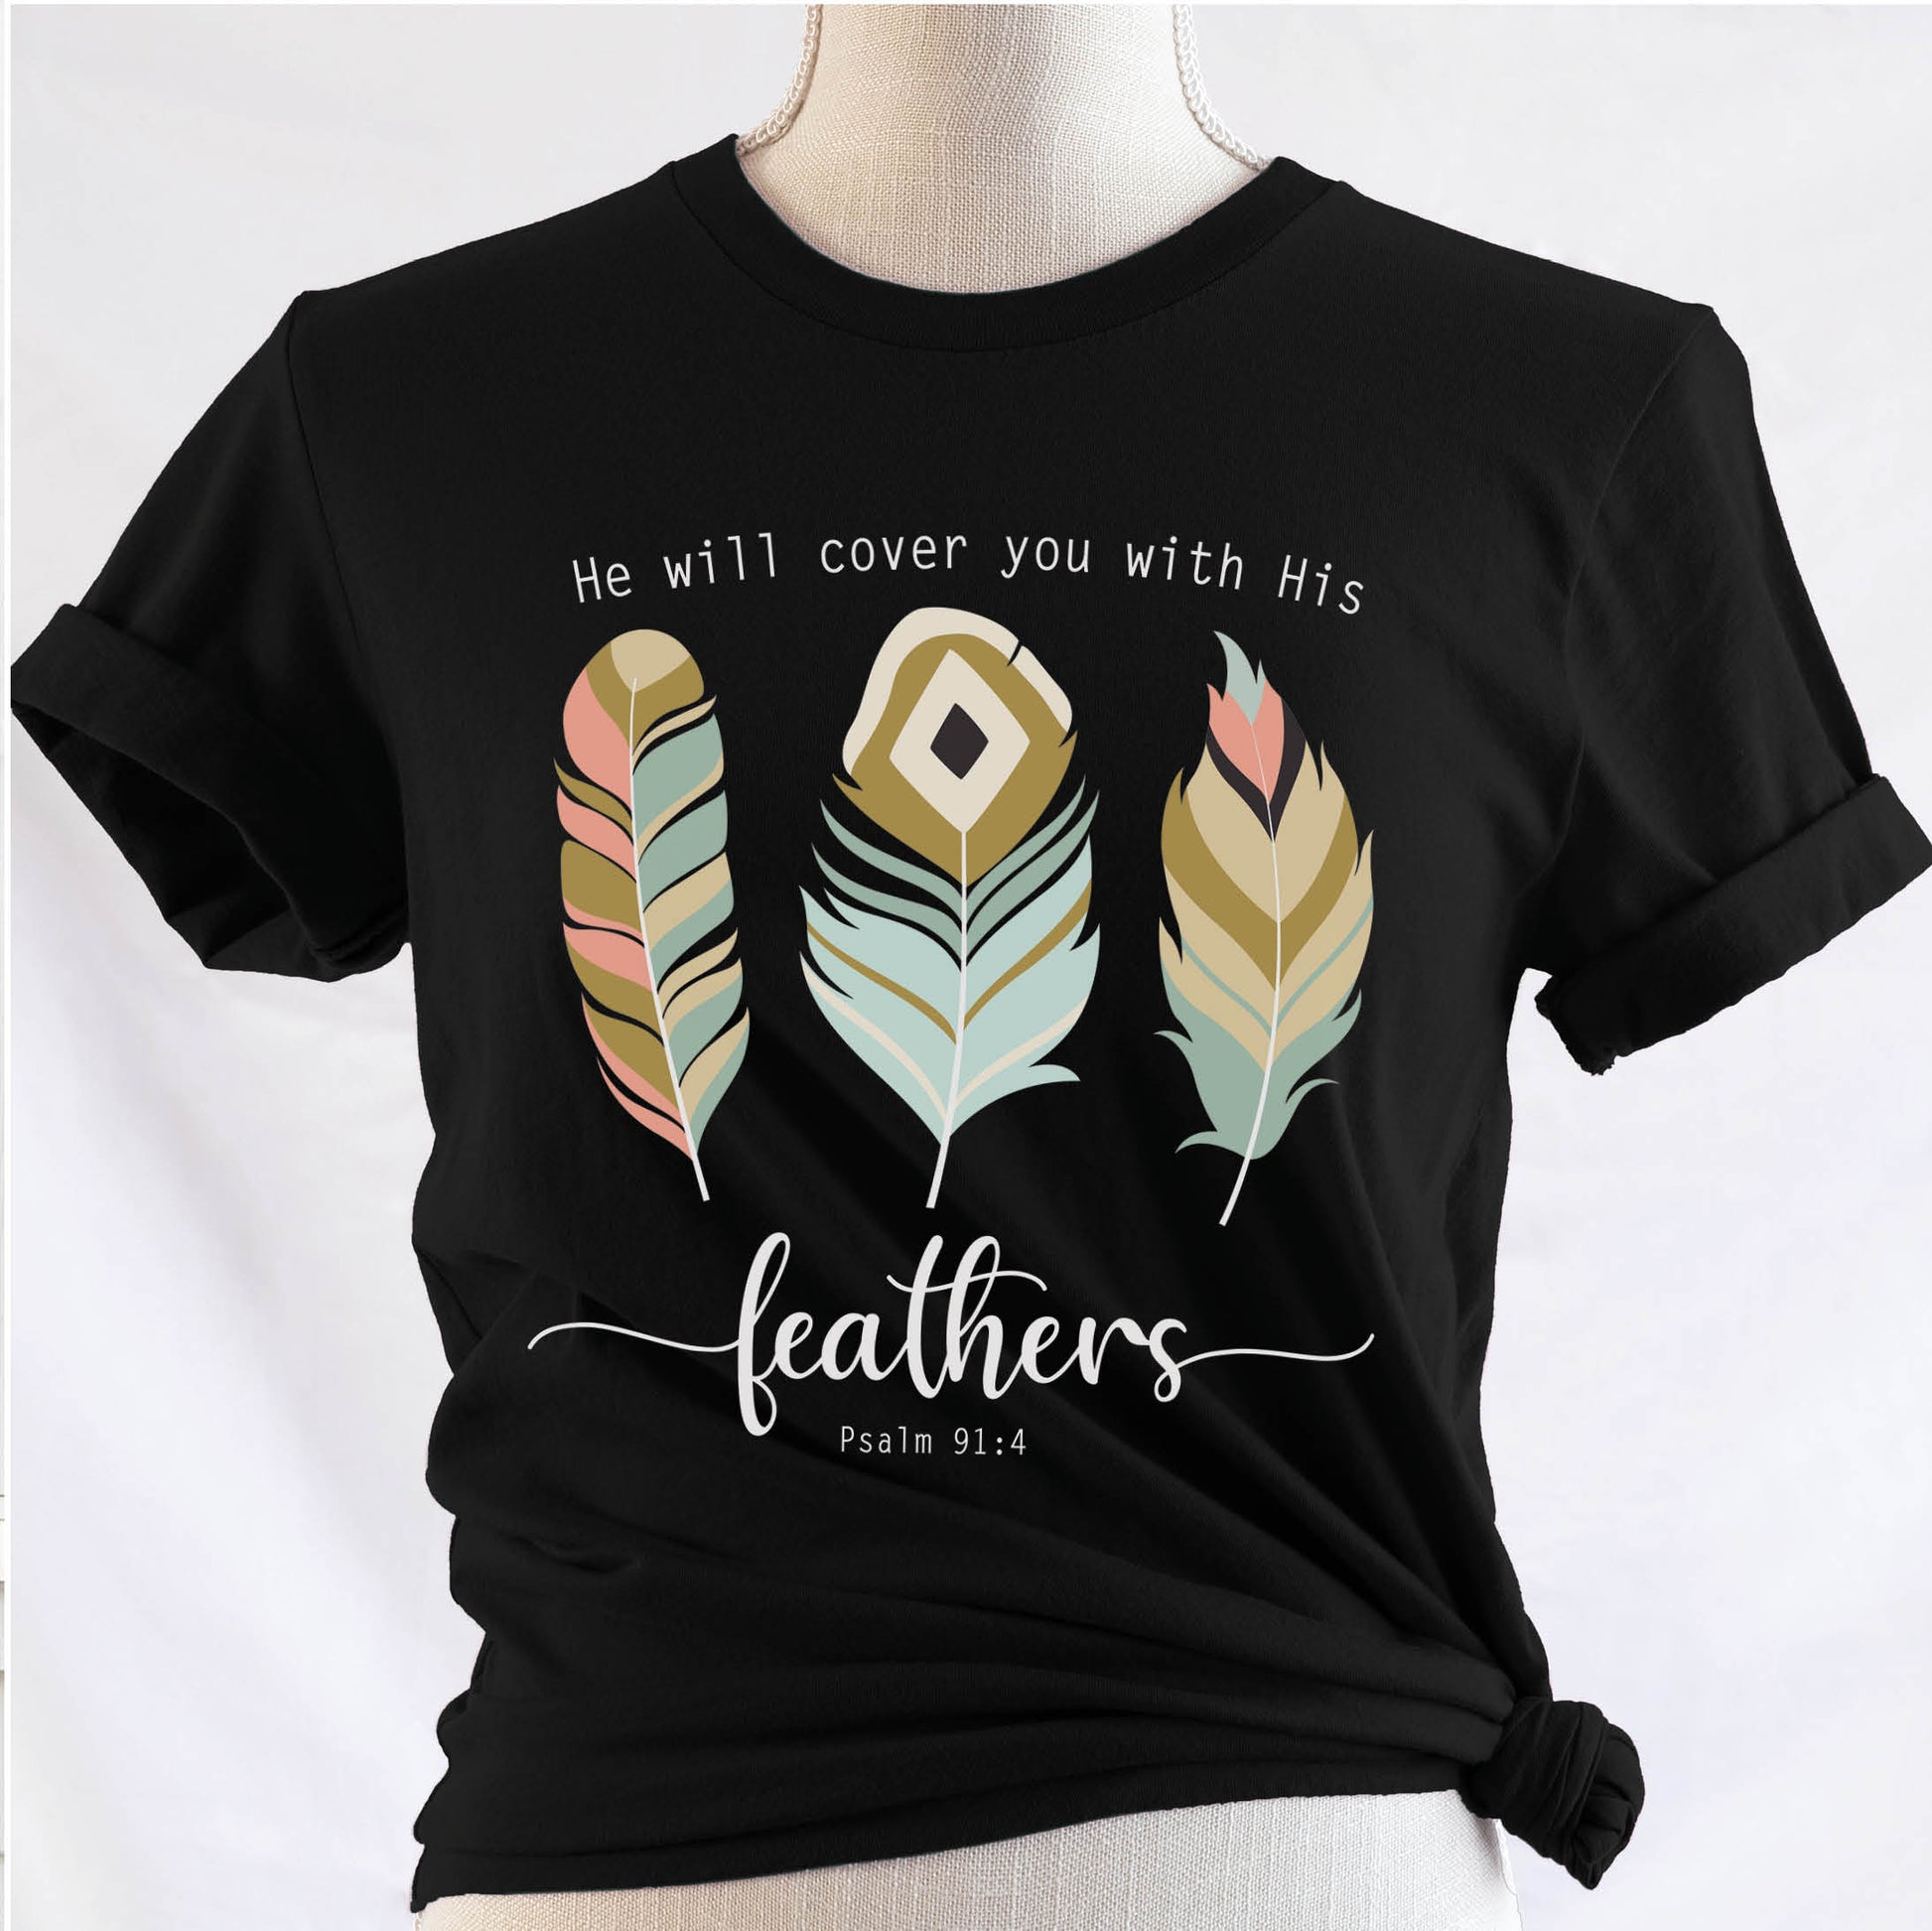 Psalm 91:4 "He Will Cover You With His Feathers" boho bible verse Christian woman aesthetic with teal peach and gold feathers printed on soft black unisex t-shirt for women